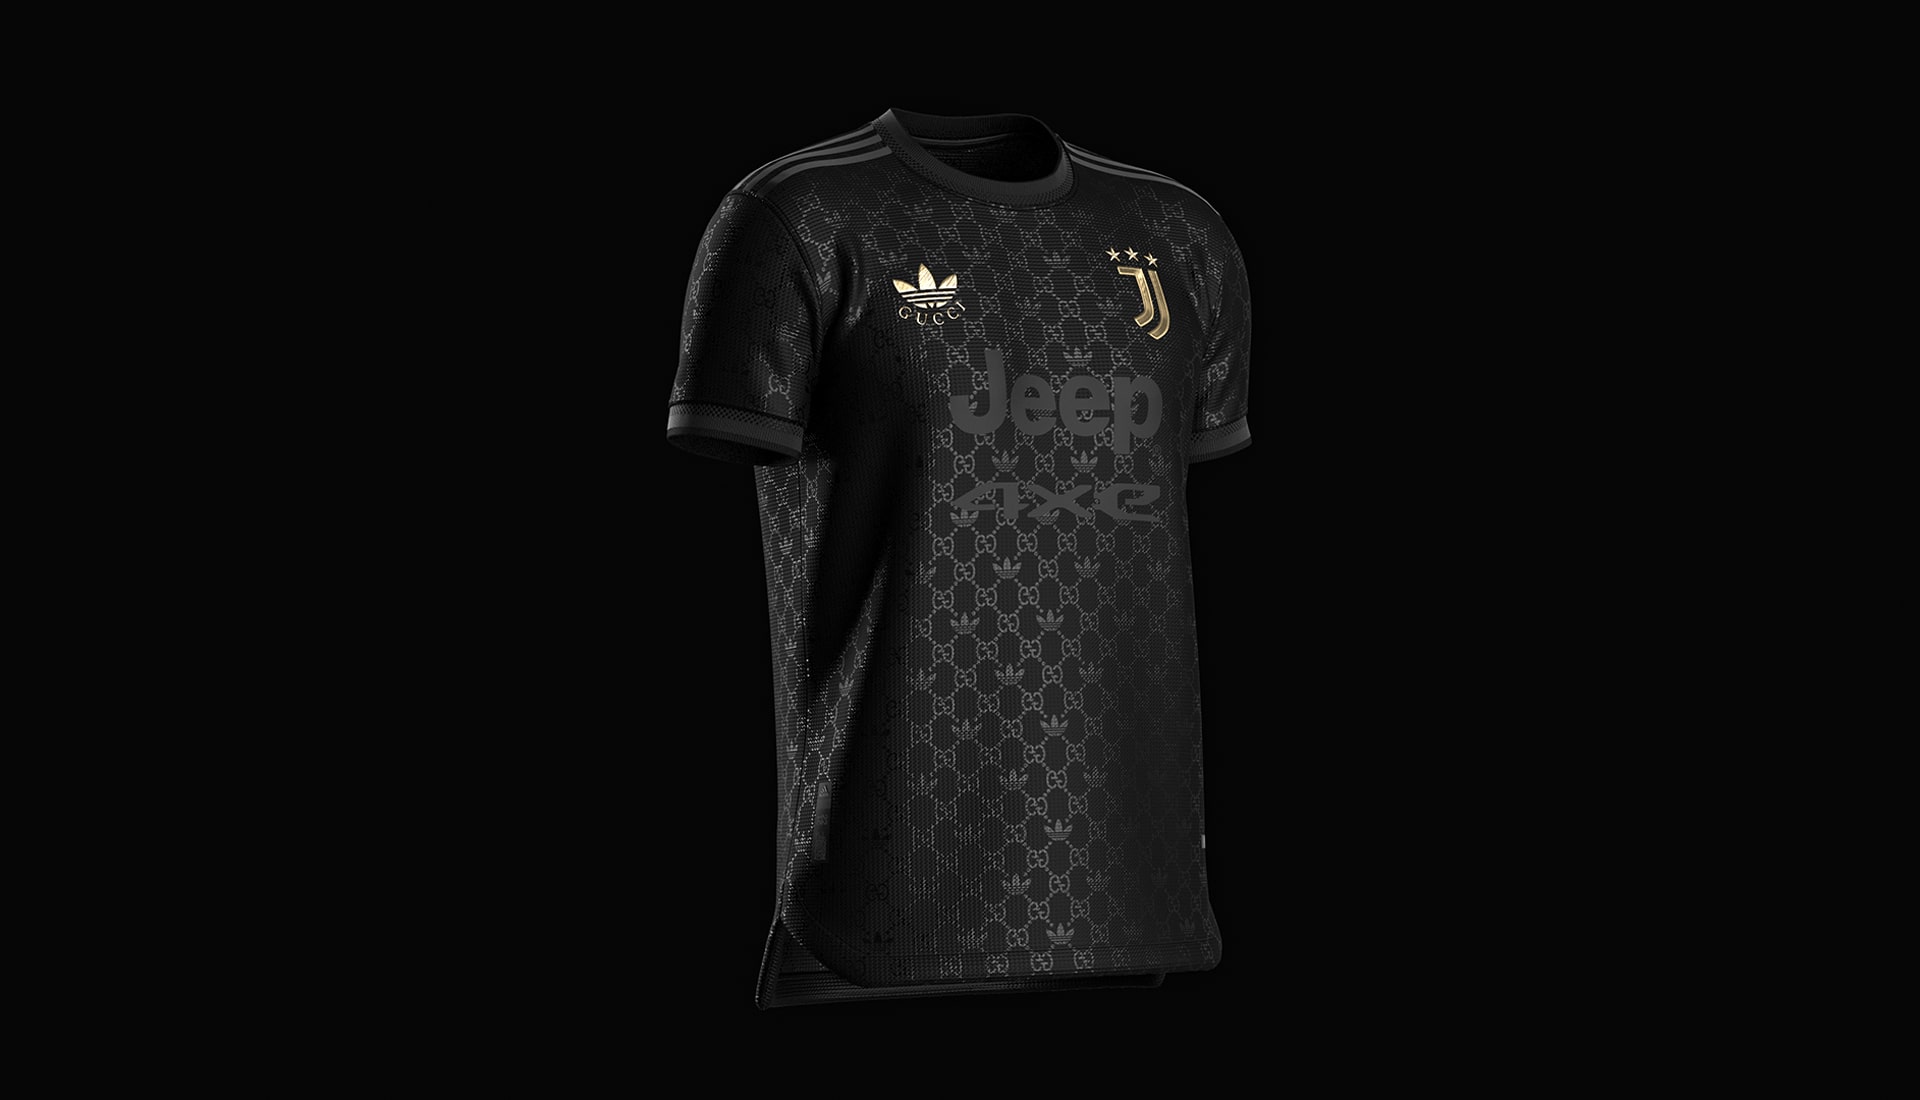 Auto Mere ulv SETTPACE Imagines Gucci x adidas Juventus Jersey - SoccerBible